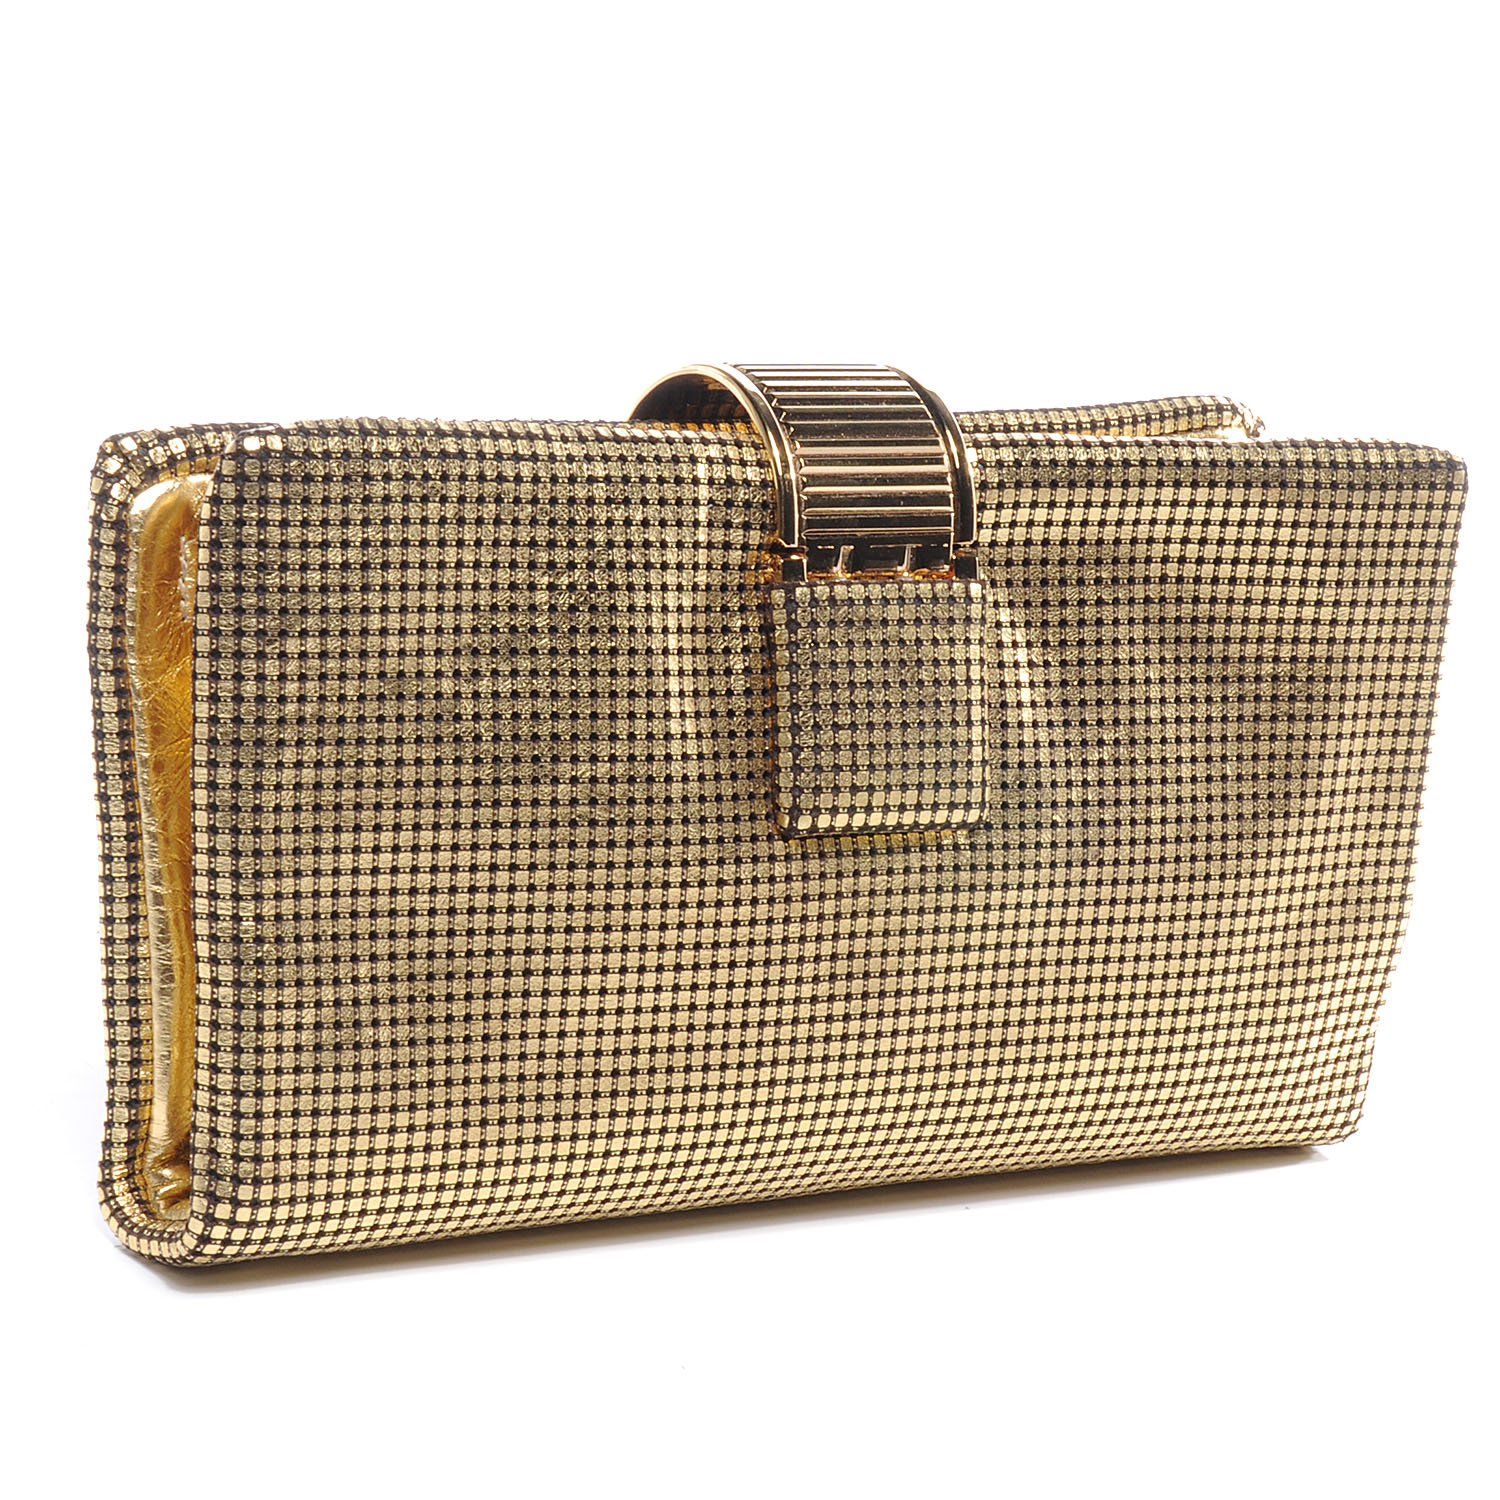 CHANEL Leather Perforated Mesh CC Clutch Metallic Gold 55930